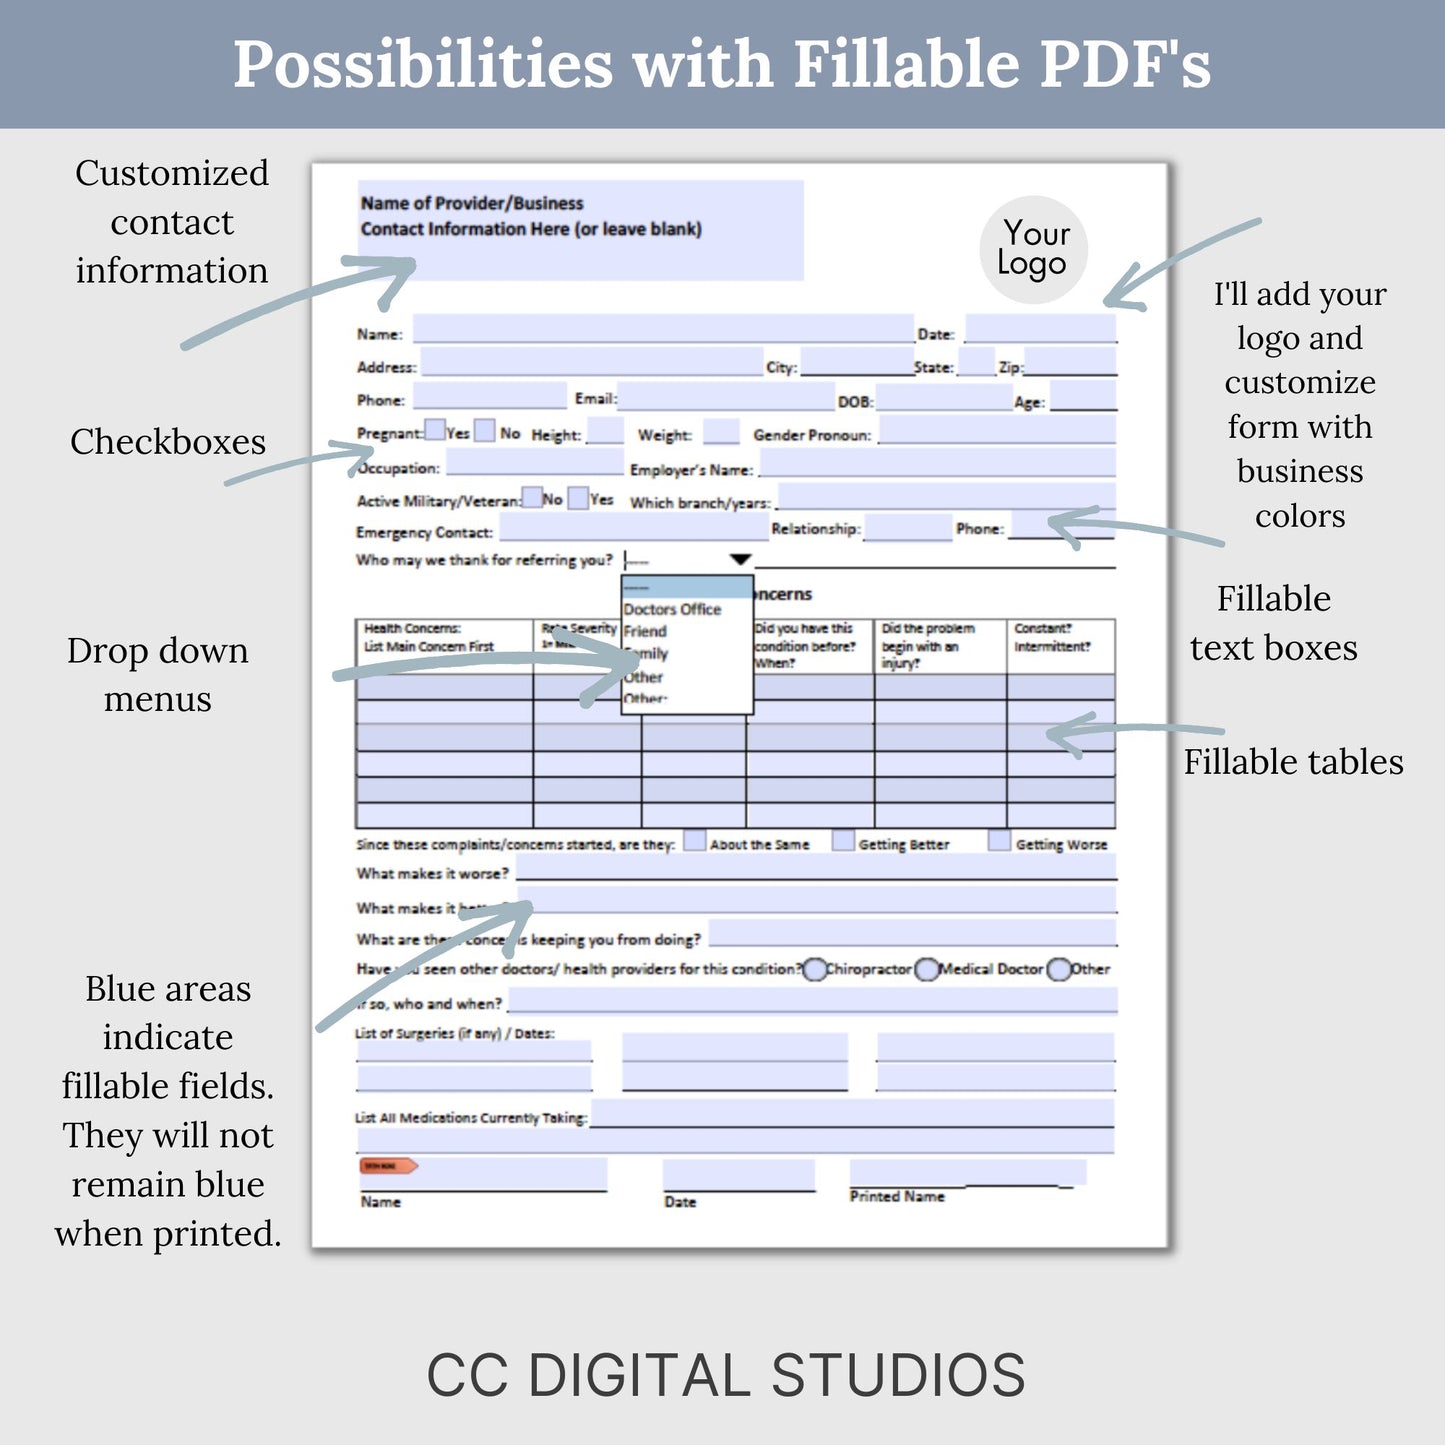 Premium PDF Conversion Package. Transform any existing WORD or Google Doc into a professional fillable PDF hassle-free. This package covers up to 20 pages